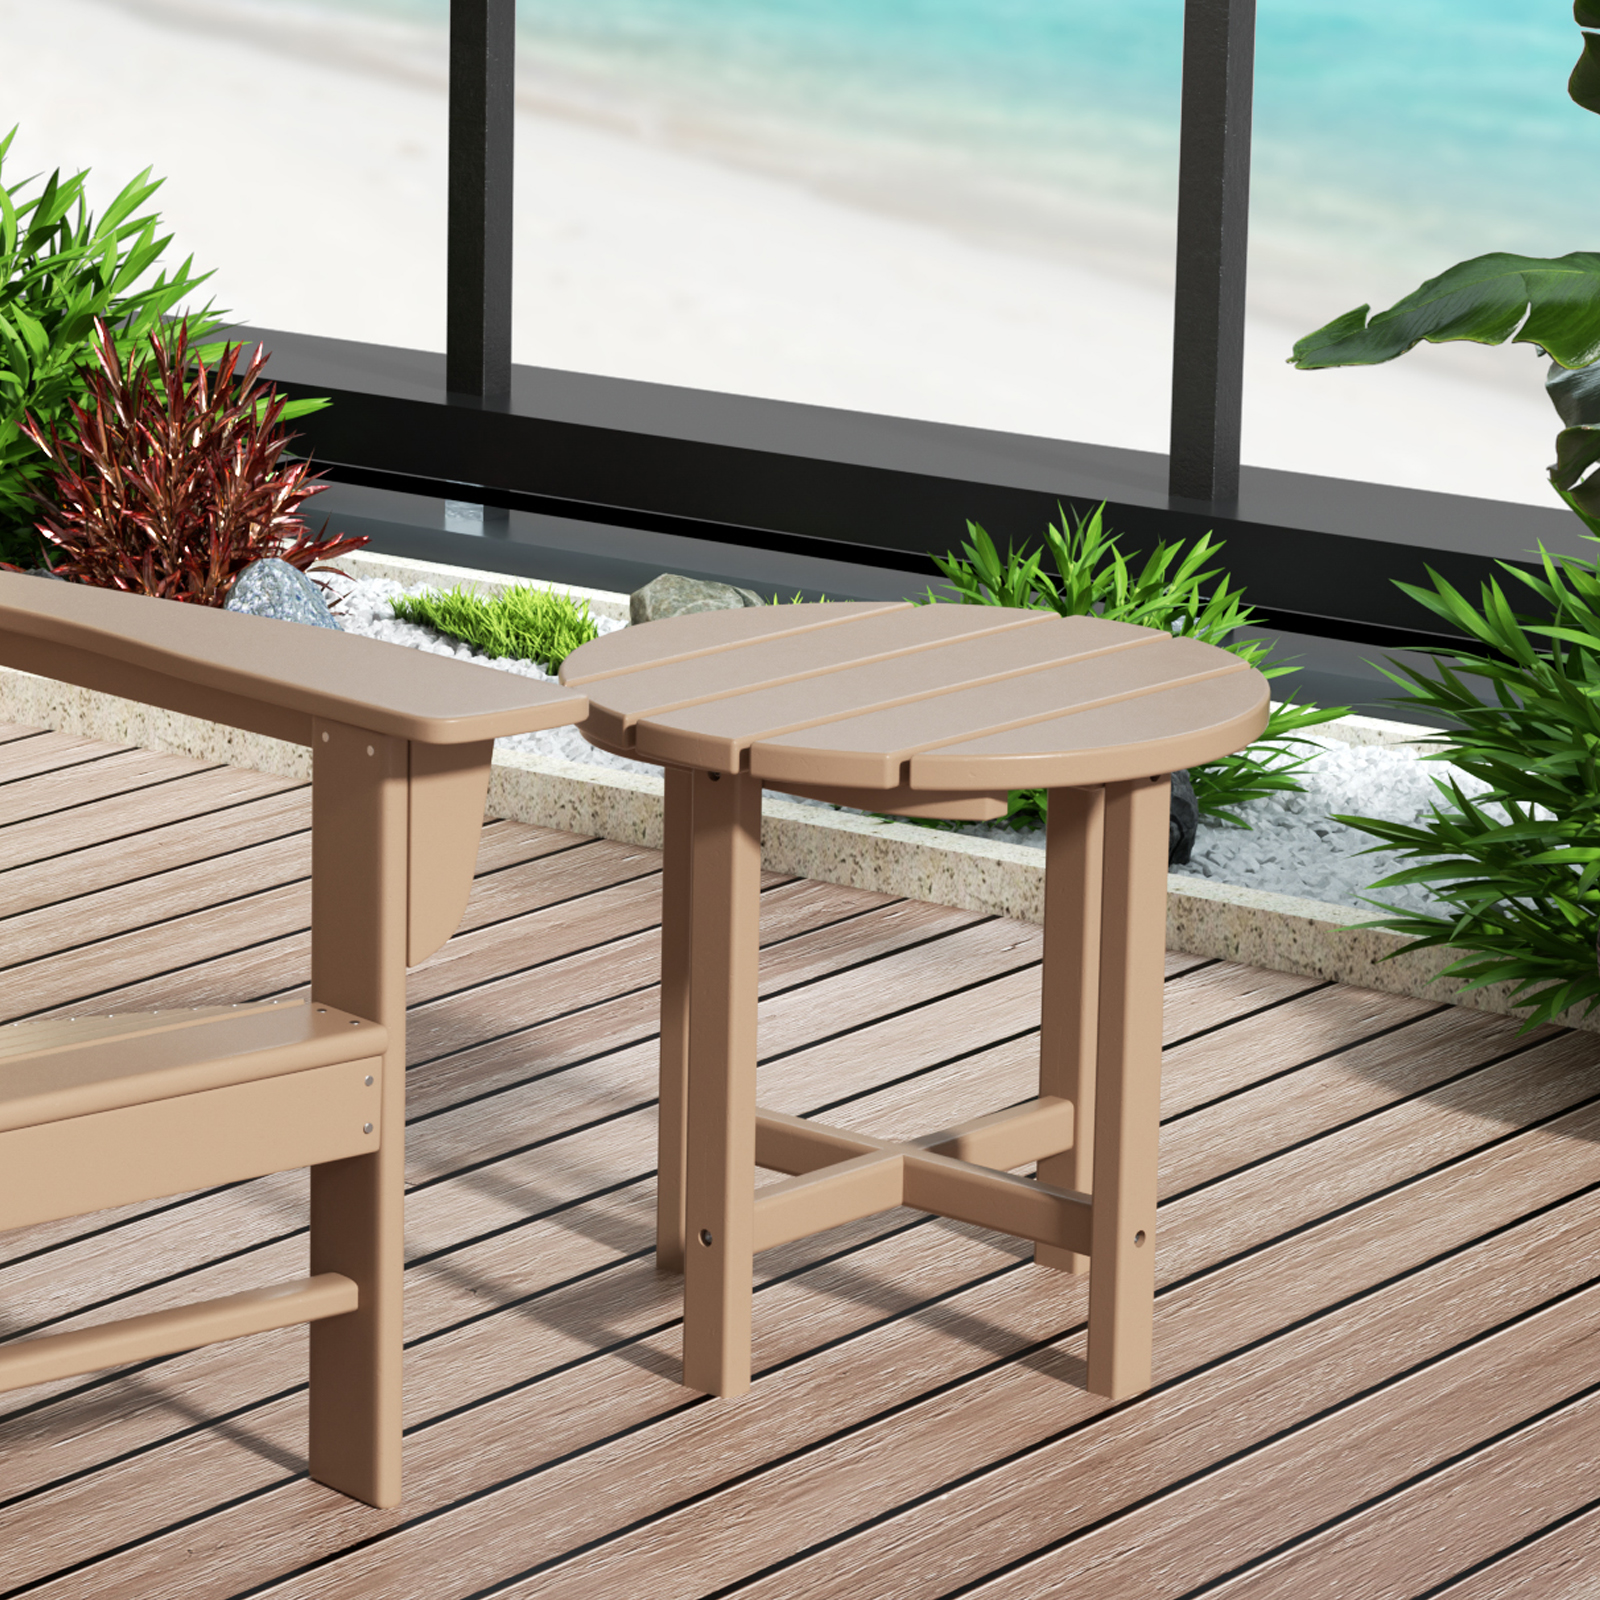 WestinTrends Outdoor Side Table, All Weather Poly Lumber Adirondack Small Patio Table Round End Table for Pool Balcony Deck Porch Lawn Backyard, Weathered Wood - image 3 of 7